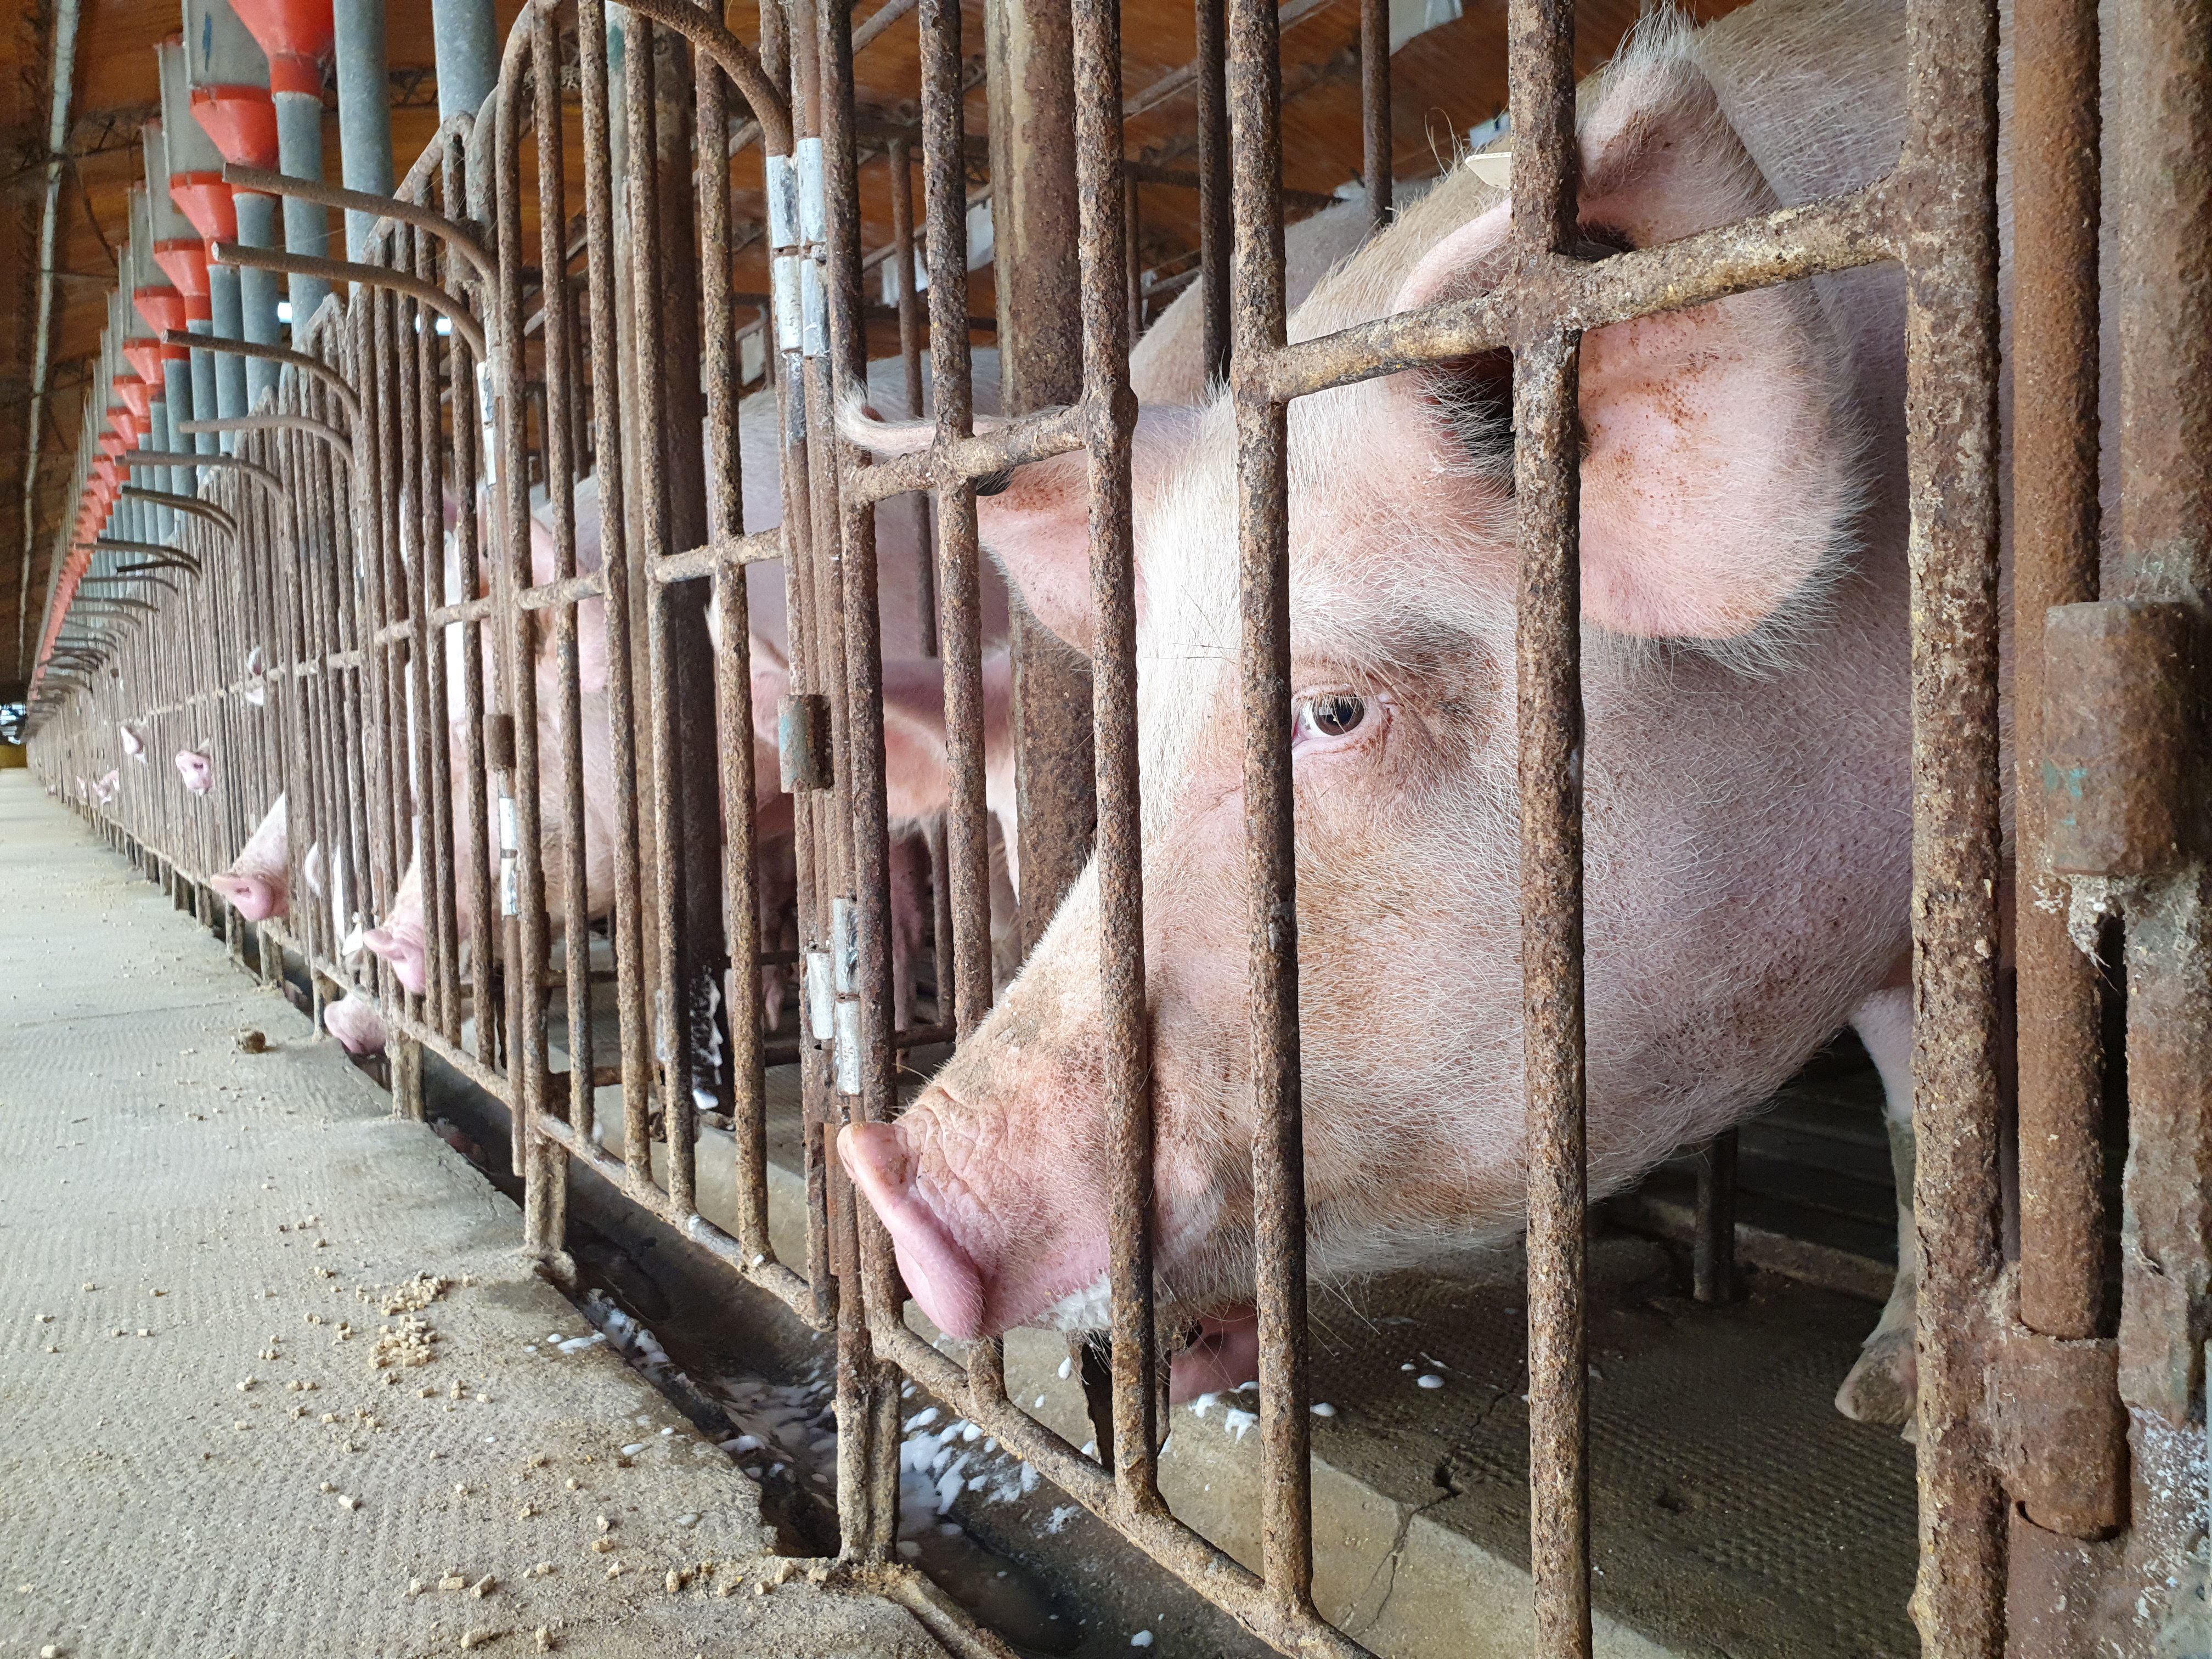 Pigs in cages at an industrial pig farm. 